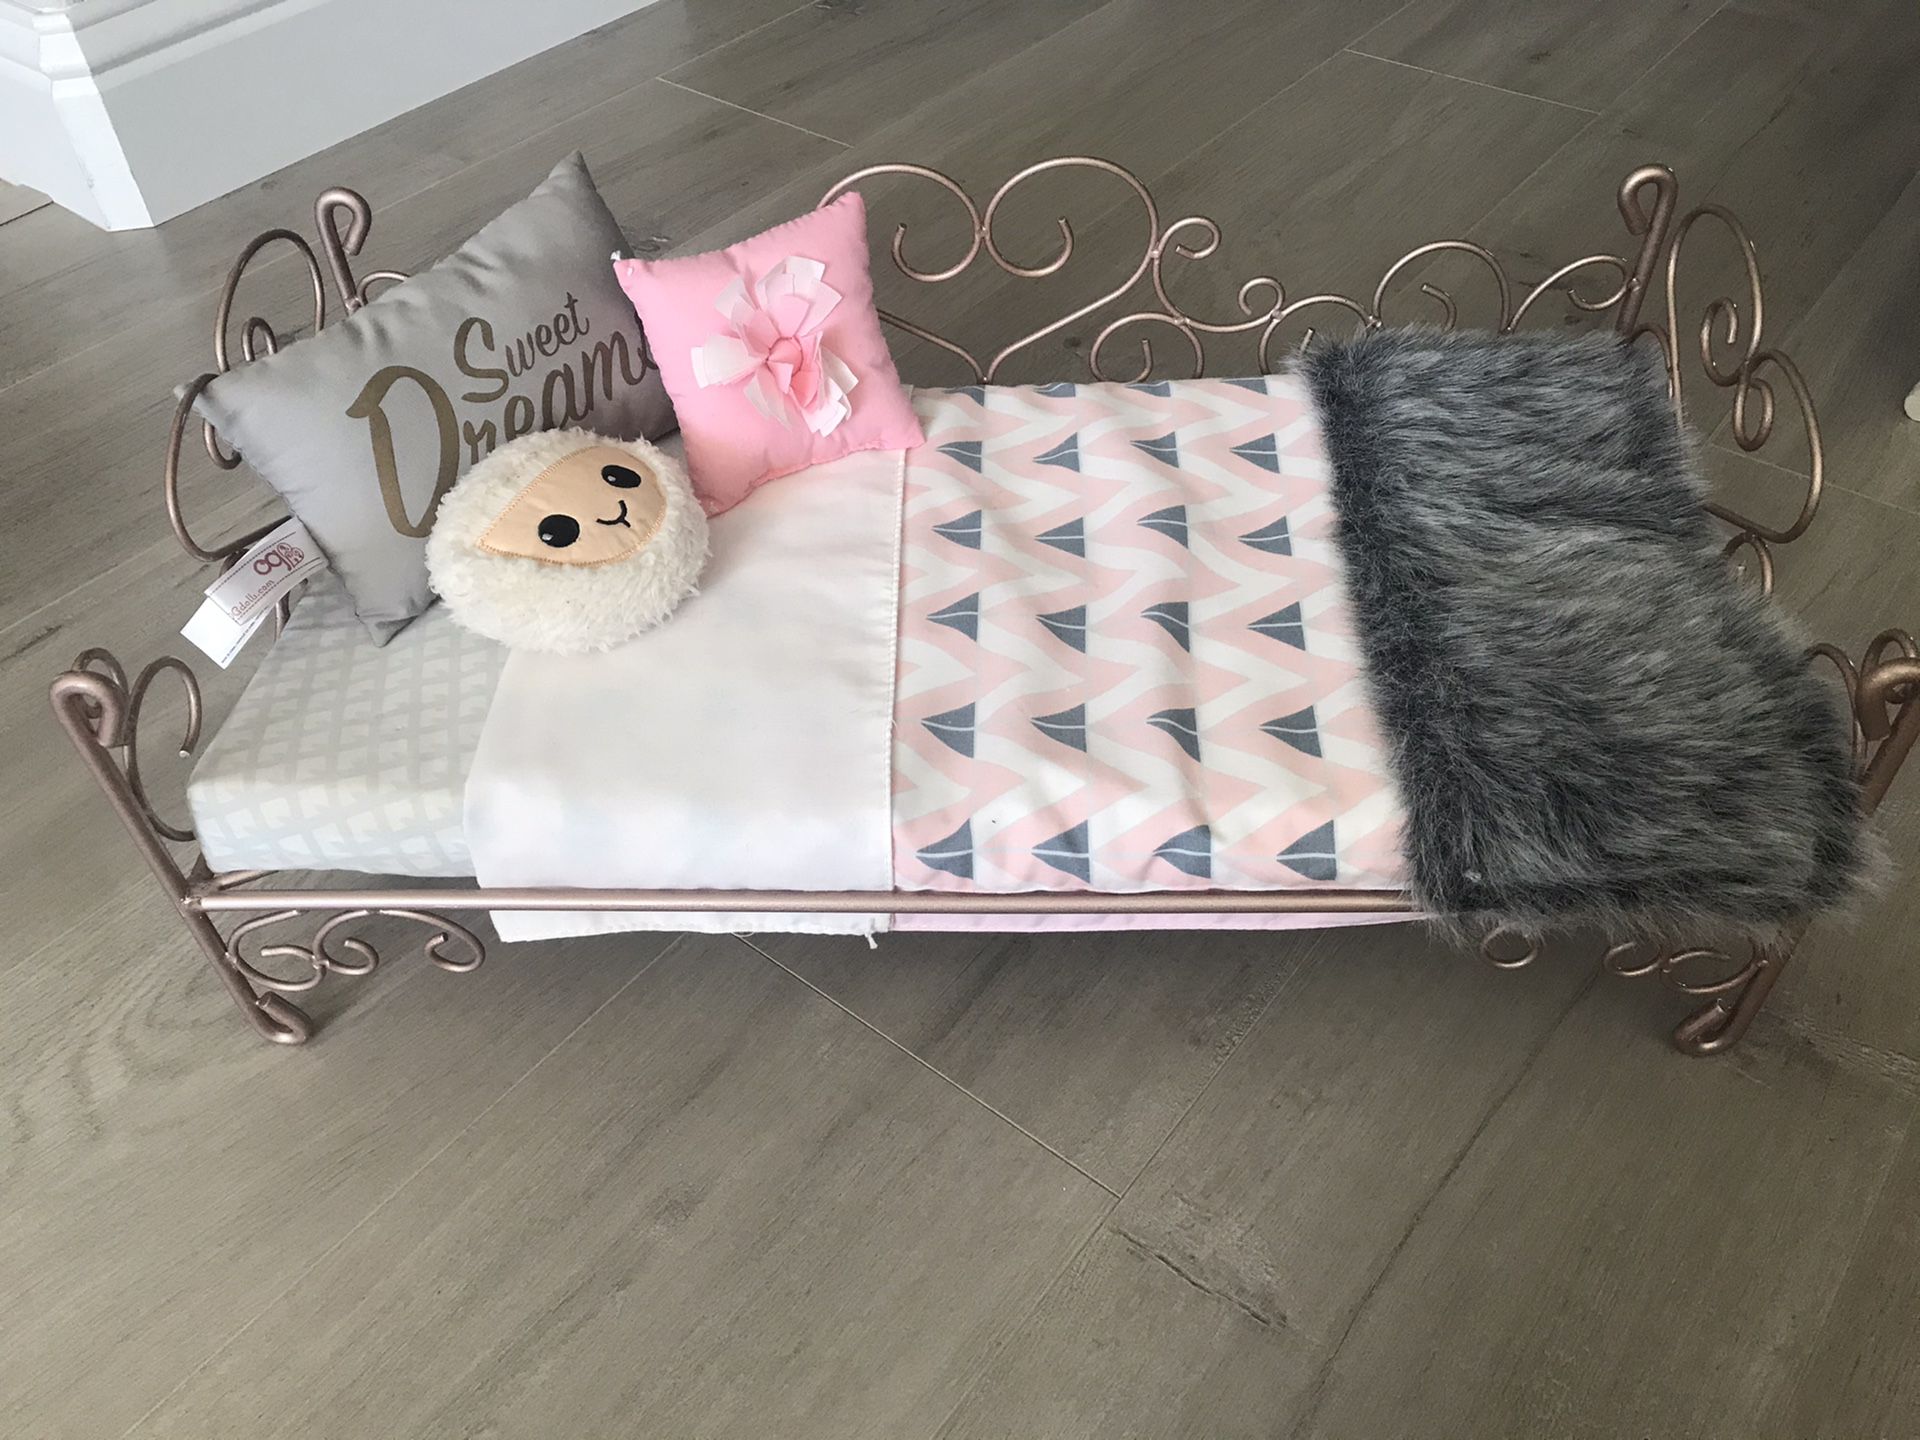 Our generation doll bed